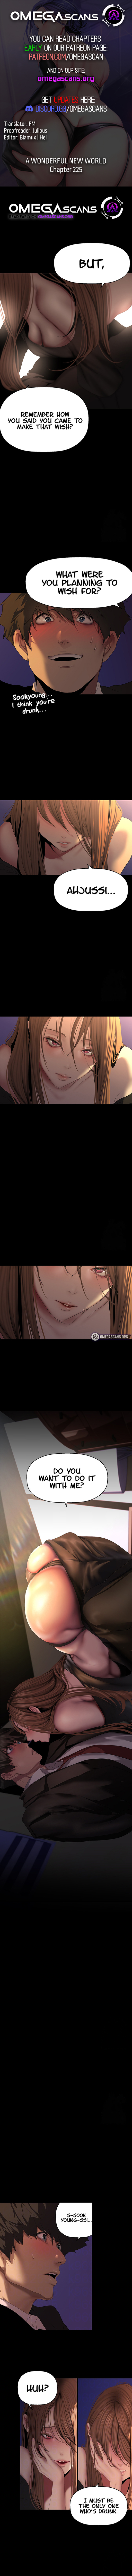 Panel Image 1 for chapter 225 of manhwa A Wonderful New World on read.oppai.stream